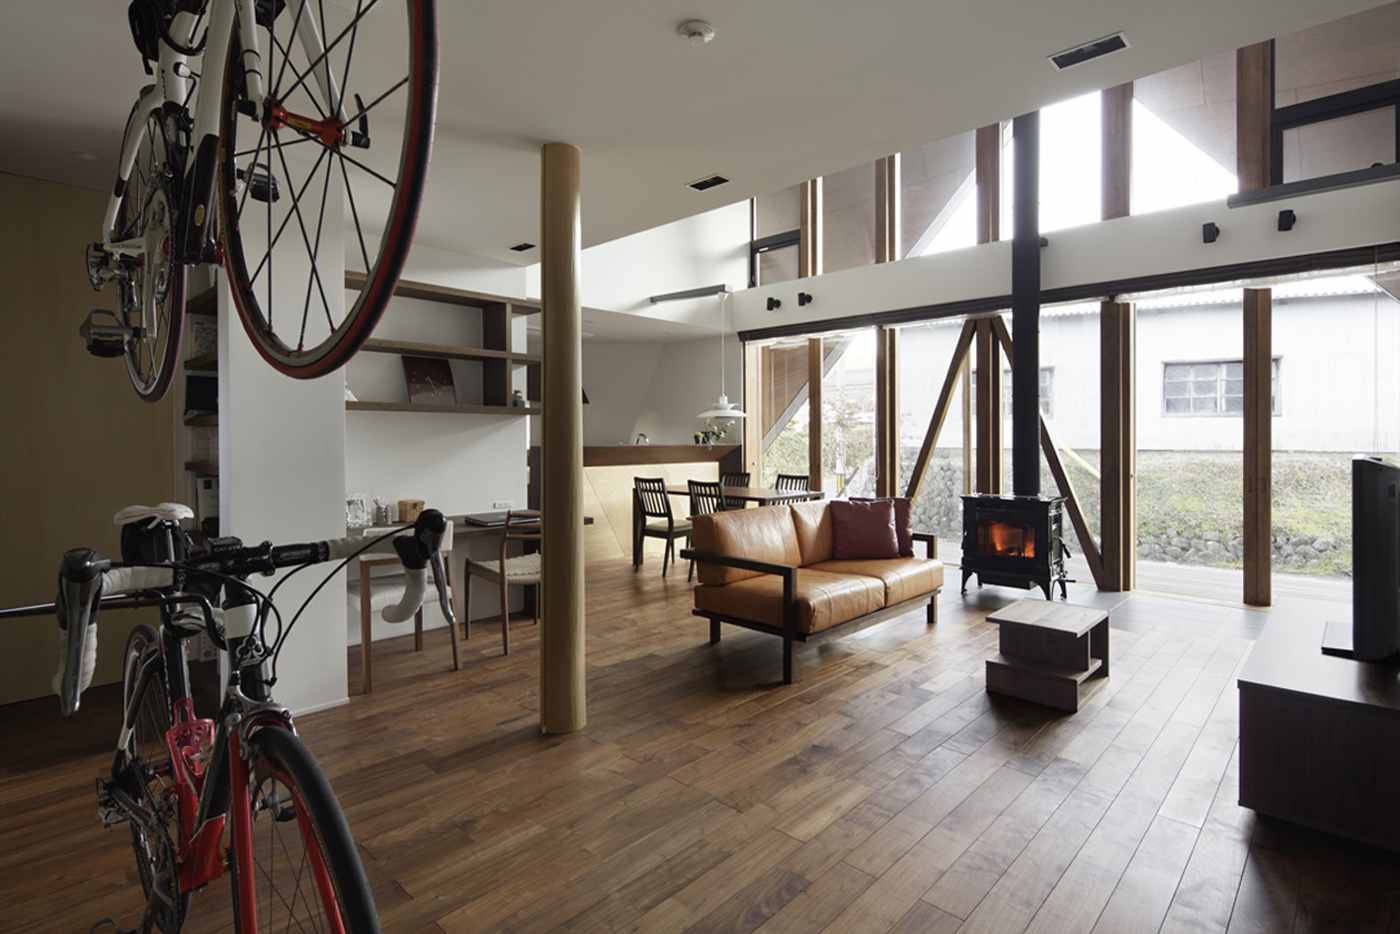 Living area with storage room for bicycles and modern furnishings in Scandinavian style